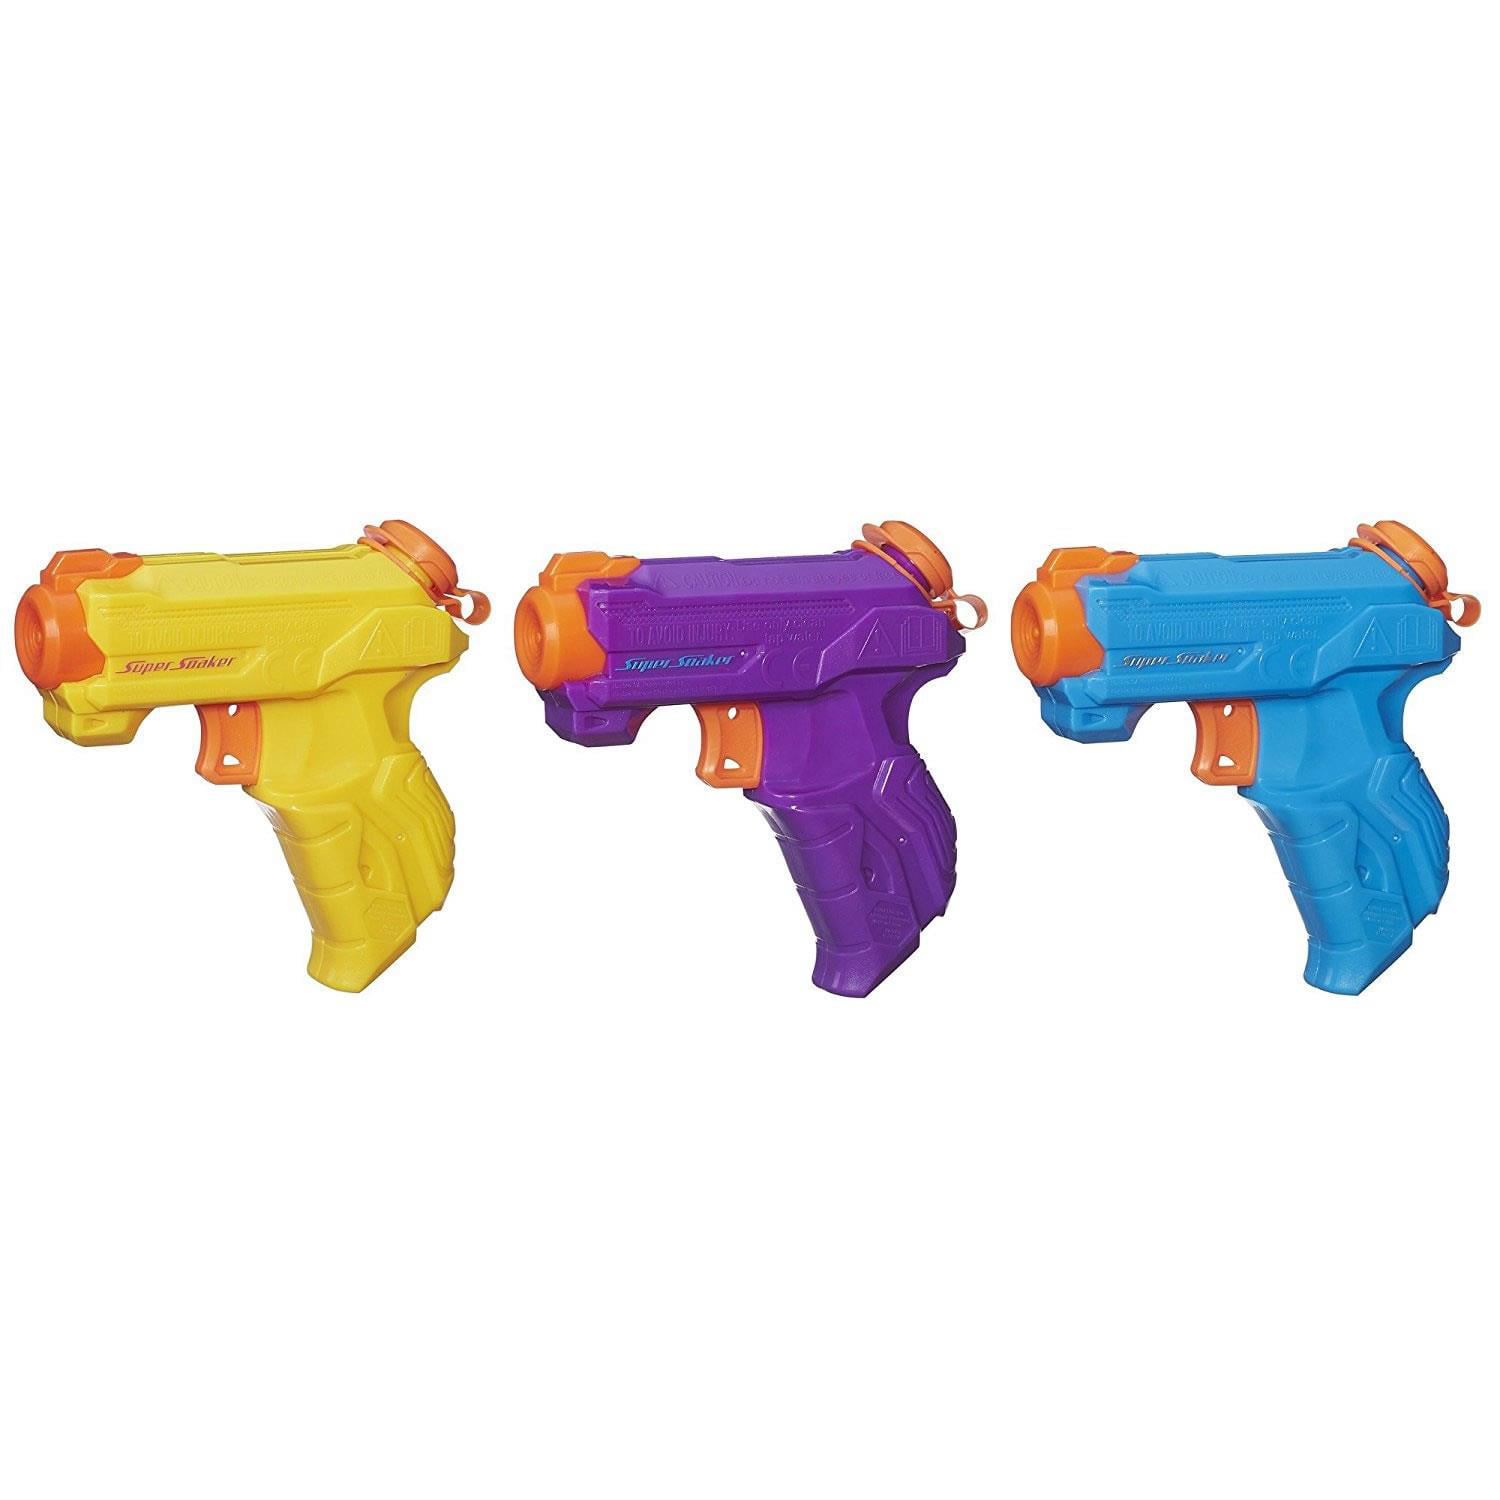 Nerf Super Soaker Zipfire 3-pack Quick Fire Water Blaster Hasbro Toy 6tsnzd1 for sale online 